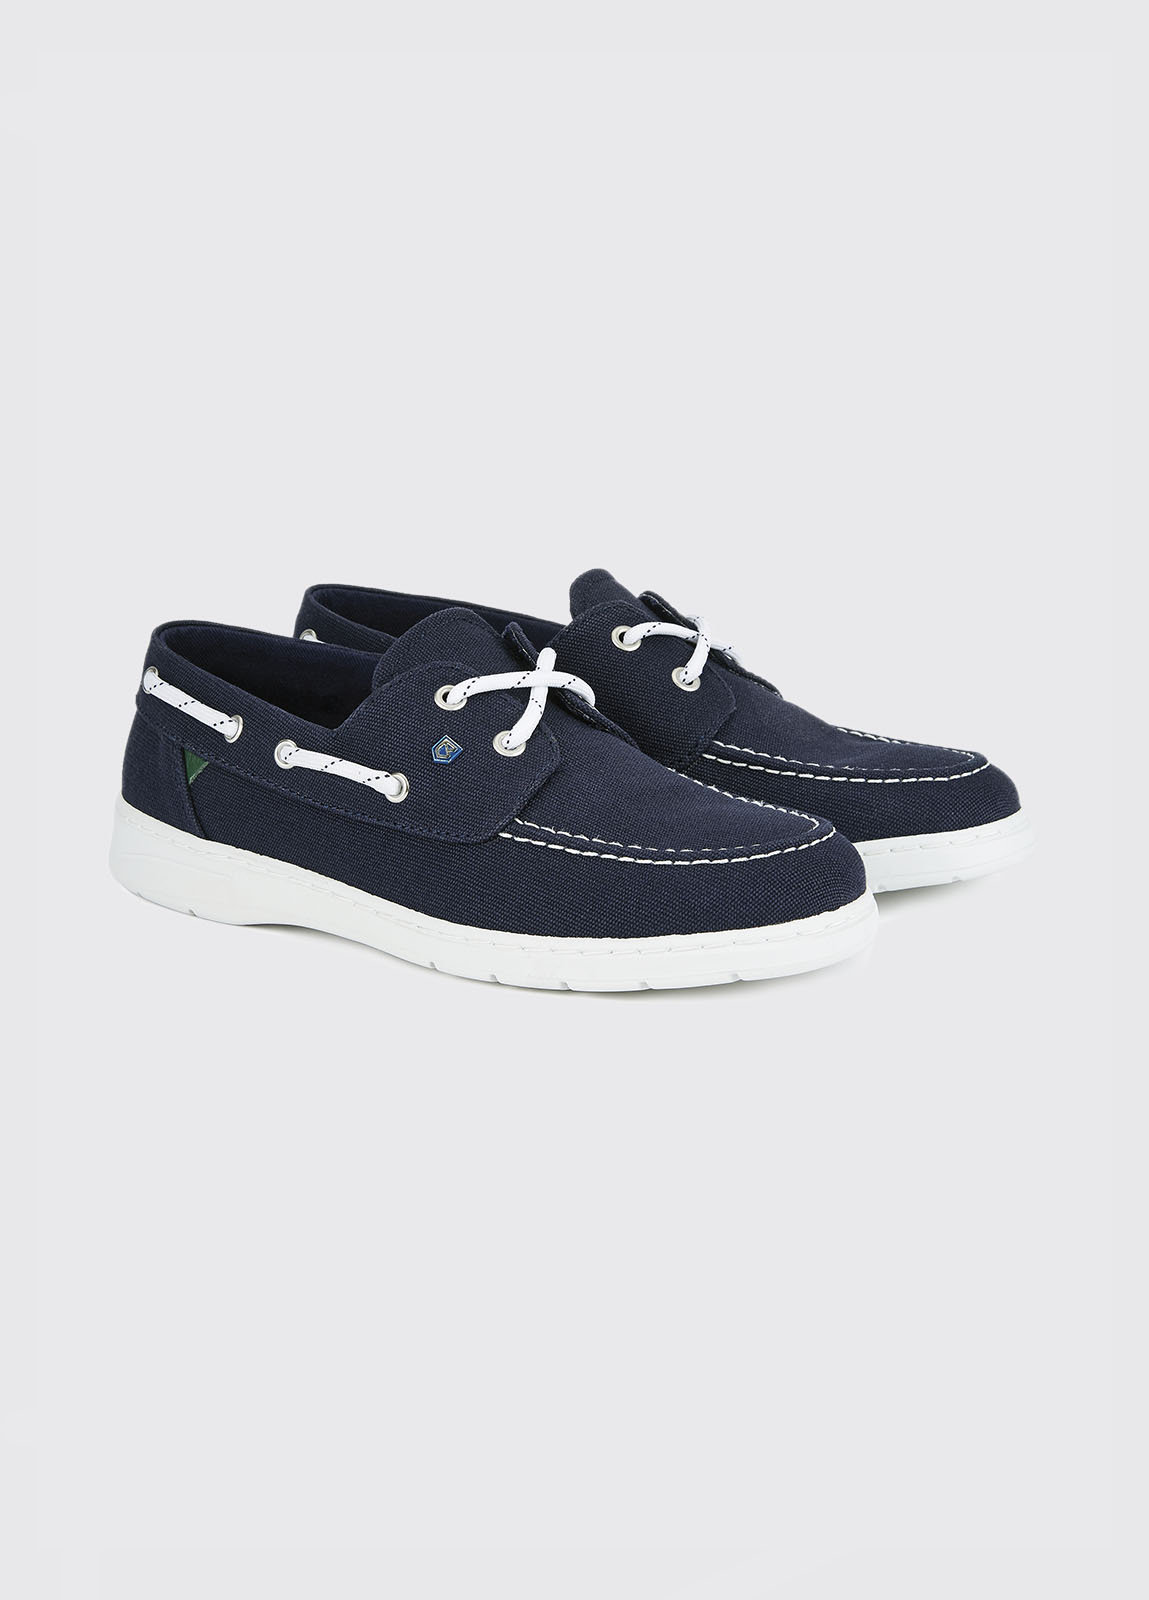 Ladies Deck & Boat Shoes from £99